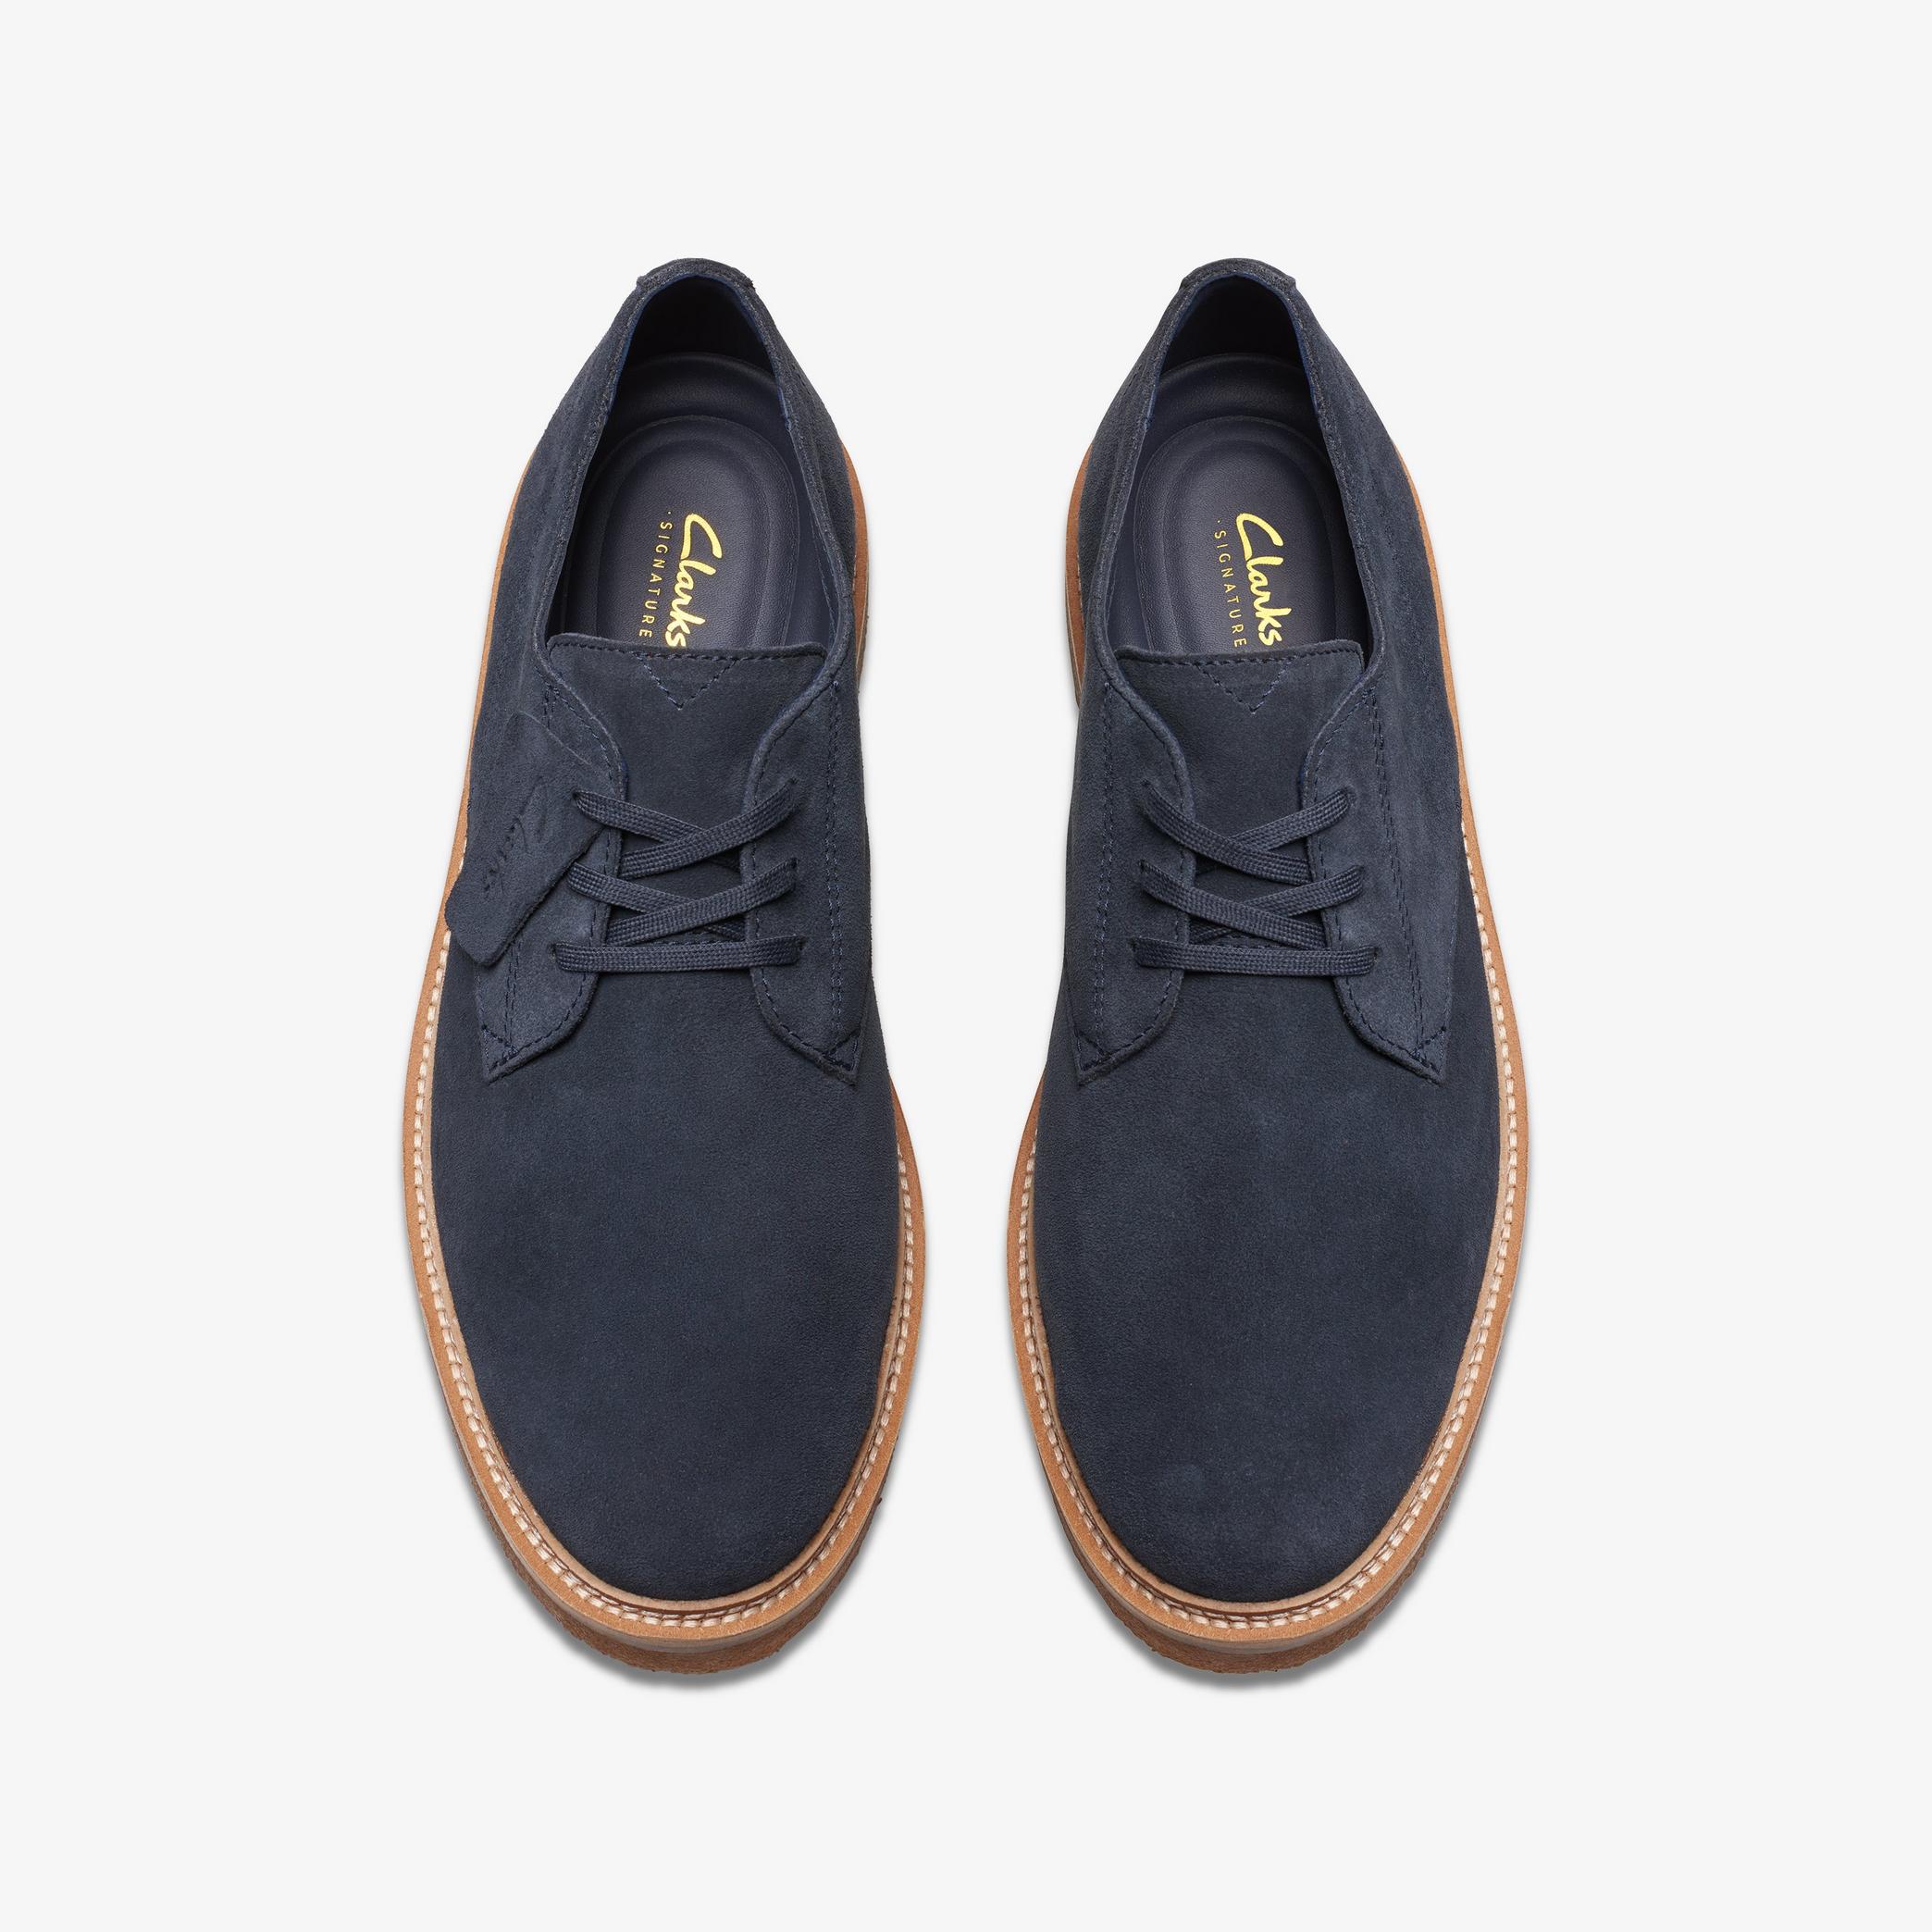 MENS Clarkdale Derby Navy Suede Oxford Shoes | Clarks US